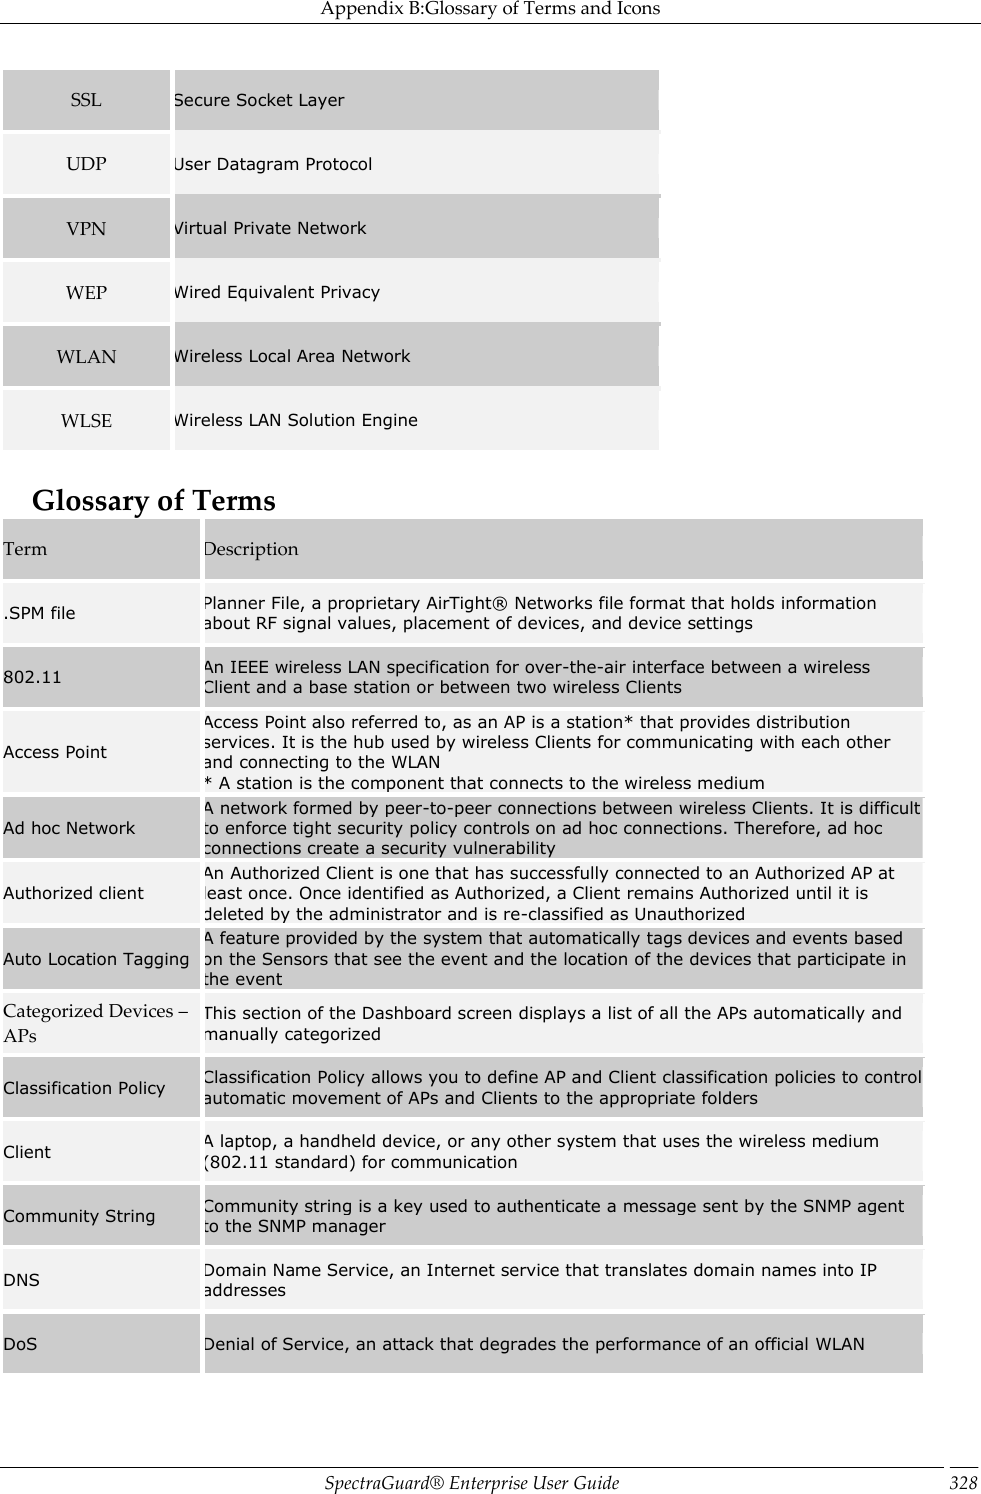 Appendix B:Glossary of Terms and Icons SpectraGuard®  Enterprise User Guide 328 SSL Secure Socket Layer UDP User Datagram Protocol VPN Virtual Private Network WEP Wired Equivalent Privacy WLAN Wireless Local Area Network WLSE Wireless LAN Solution Engine   Glossary of Terms Term Description .SPM file Planner File, a proprietary AirTight®  Networks file format that holds information about RF signal values, placement of devices, and device settings 802.11 An IEEE wireless LAN specification for over-the-air interface between a wireless Client and a base station or between two wireless Clients Access Point Access Point also referred to, as an AP is a station* that provides distribution services. It is the hub used by wireless Clients for communicating with each other and connecting to the WLAN * A station is the component that connects to the wireless medium Ad hoc Network A network formed by peer-to-peer connections between wireless Clients. It is difficult to enforce tight security policy controls on ad hoc connections. Therefore, ad hoc connections create a security vulnerability Authorized client An Authorized Client is one that has successfully connected to an Authorized AP at least once. Once identified as Authorized, a Client remains Authorized until it is deleted by the administrator and is re-classified as Unauthorized Auto Location Tagging A feature provided by the system that automatically tags devices and events based on the Sensors that see the event and the location of the devices that participate in the event Categorized Devices – APs This section of the Dashboard screen displays a list of all the APs automatically and manually categorized Classification Policy Classification Policy allows you to define AP and Client classification policies to control automatic movement of APs and Clients to the appropriate folders Client A laptop, a handheld device, or any other system that uses the wireless medium (802.11 standard) for communication Community String Community string is a key used to authenticate a message sent by the SNMP agent to the SNMP manager DNS Domain Name Service, an Internet service that translates domain names into IP addresses DoS Denial of Service, an attack that degrades the performance of an official WLAN 